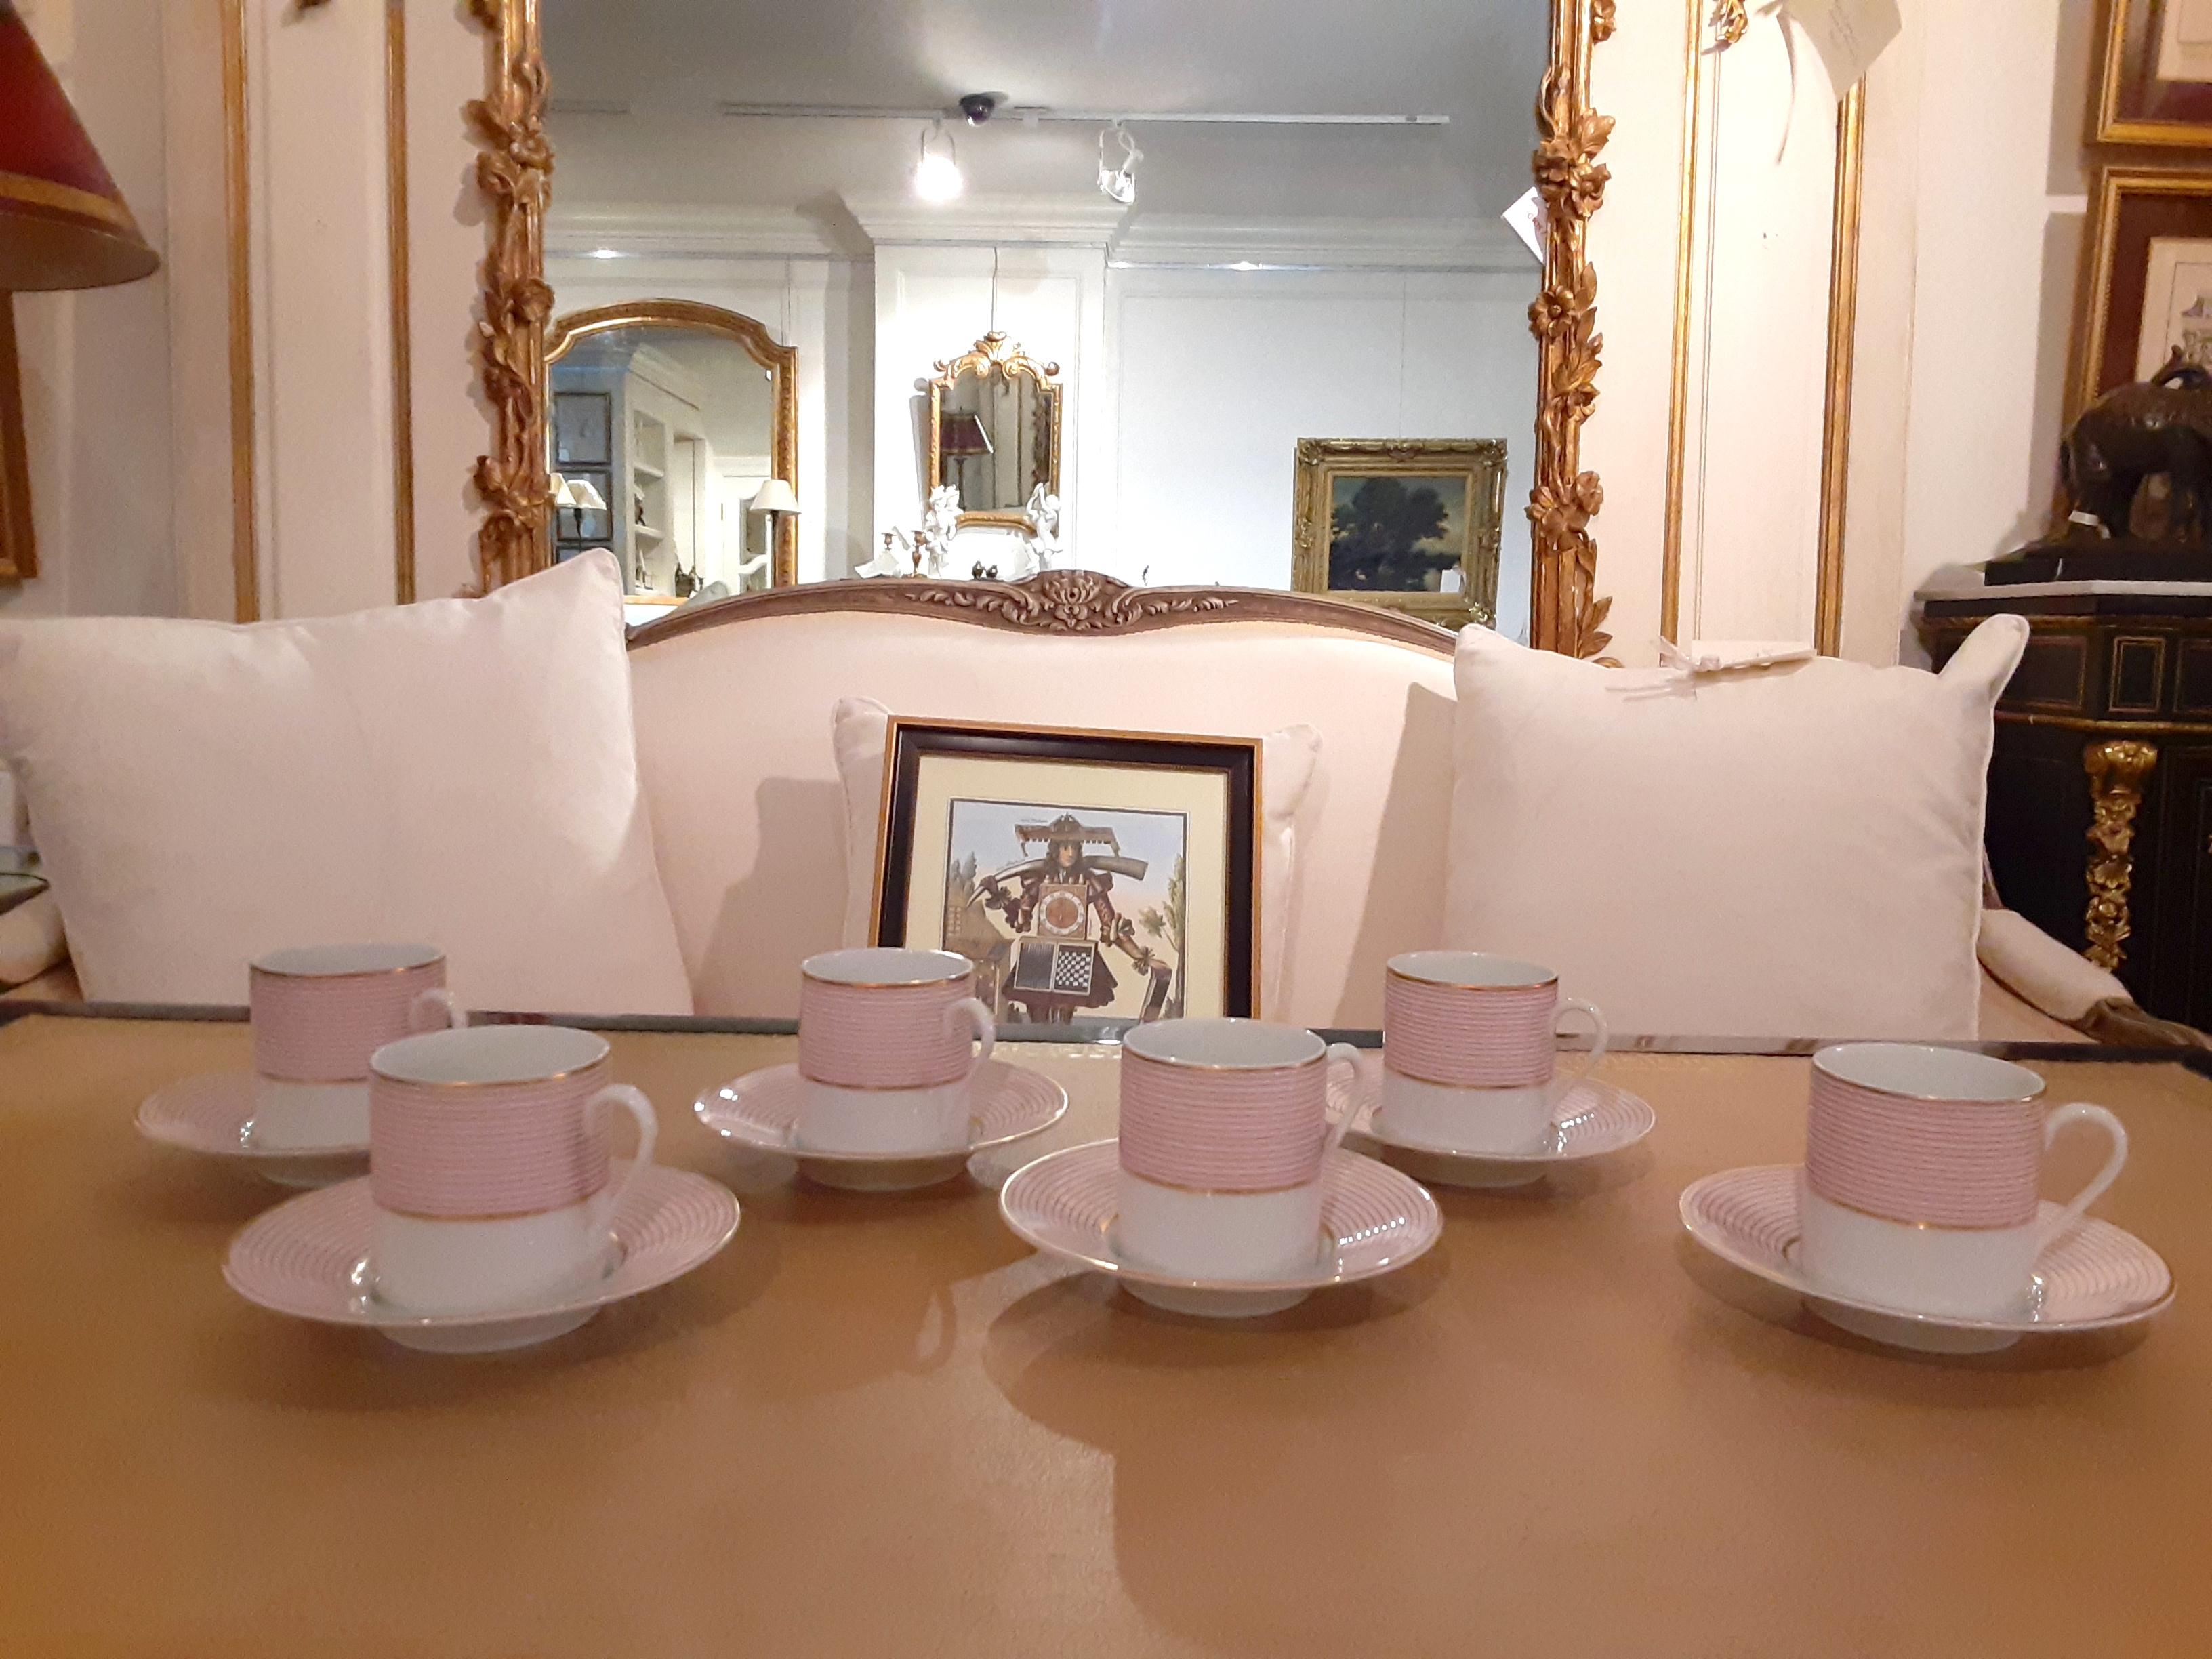 Set of French coffee cups and saucers from la Maison Raynaud, Limoges
White with pink stripes, a truly lovely set.
Set includes:
Measures: Cups (6) 3” W x 2.5” H x 2.25” D
Saucers (6) 4.75” W x 0.75” H.